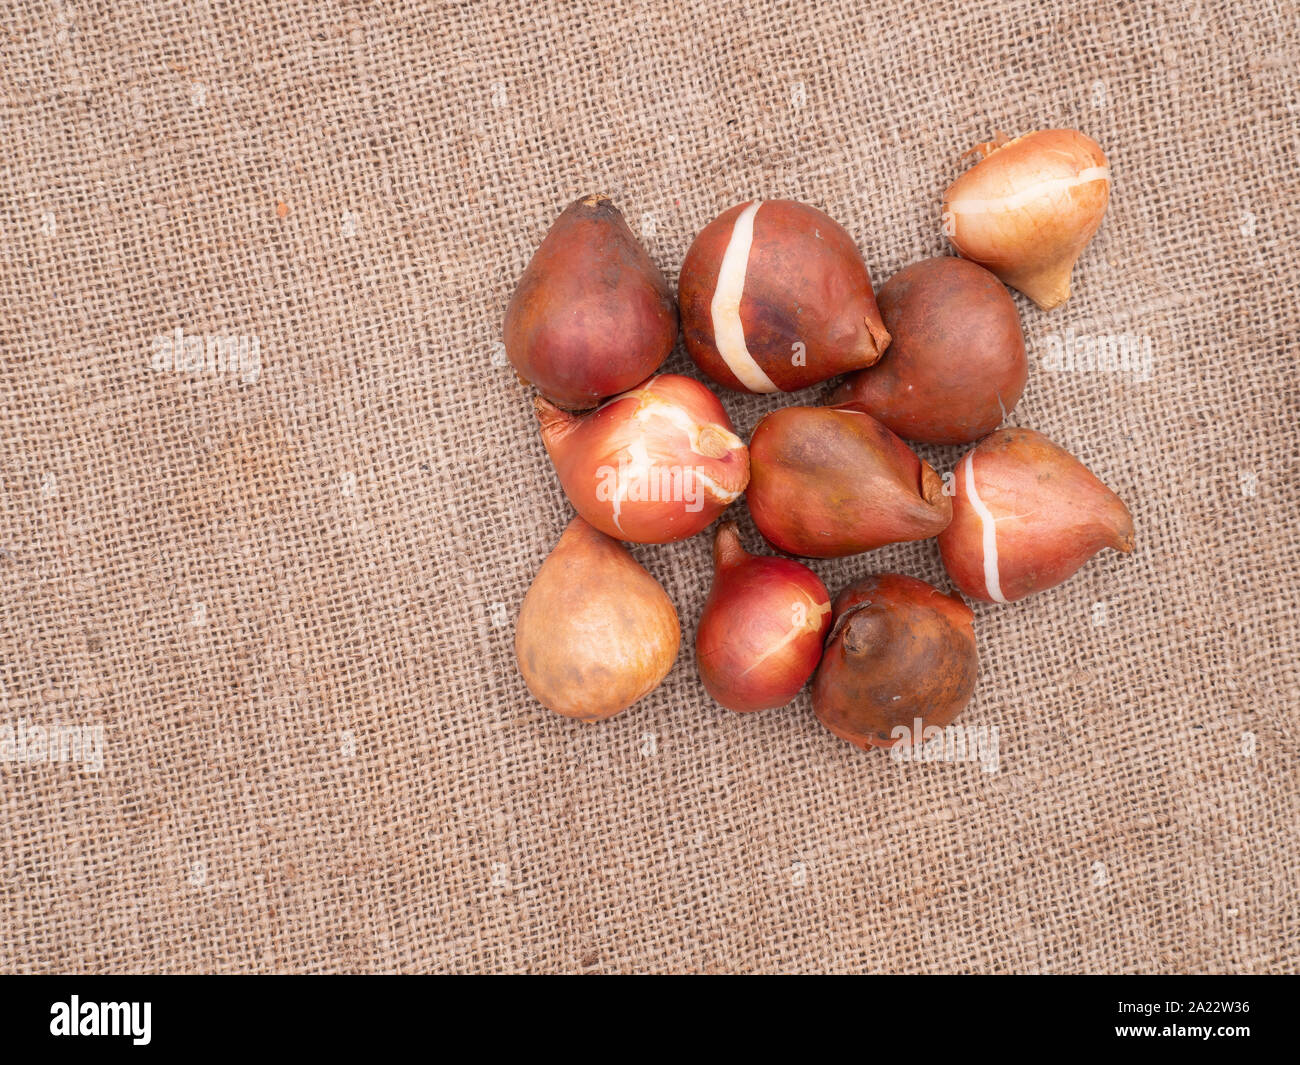 Assorted tulip bulbs on rustic hessian with copyspace. Overhead view. Stock Photo